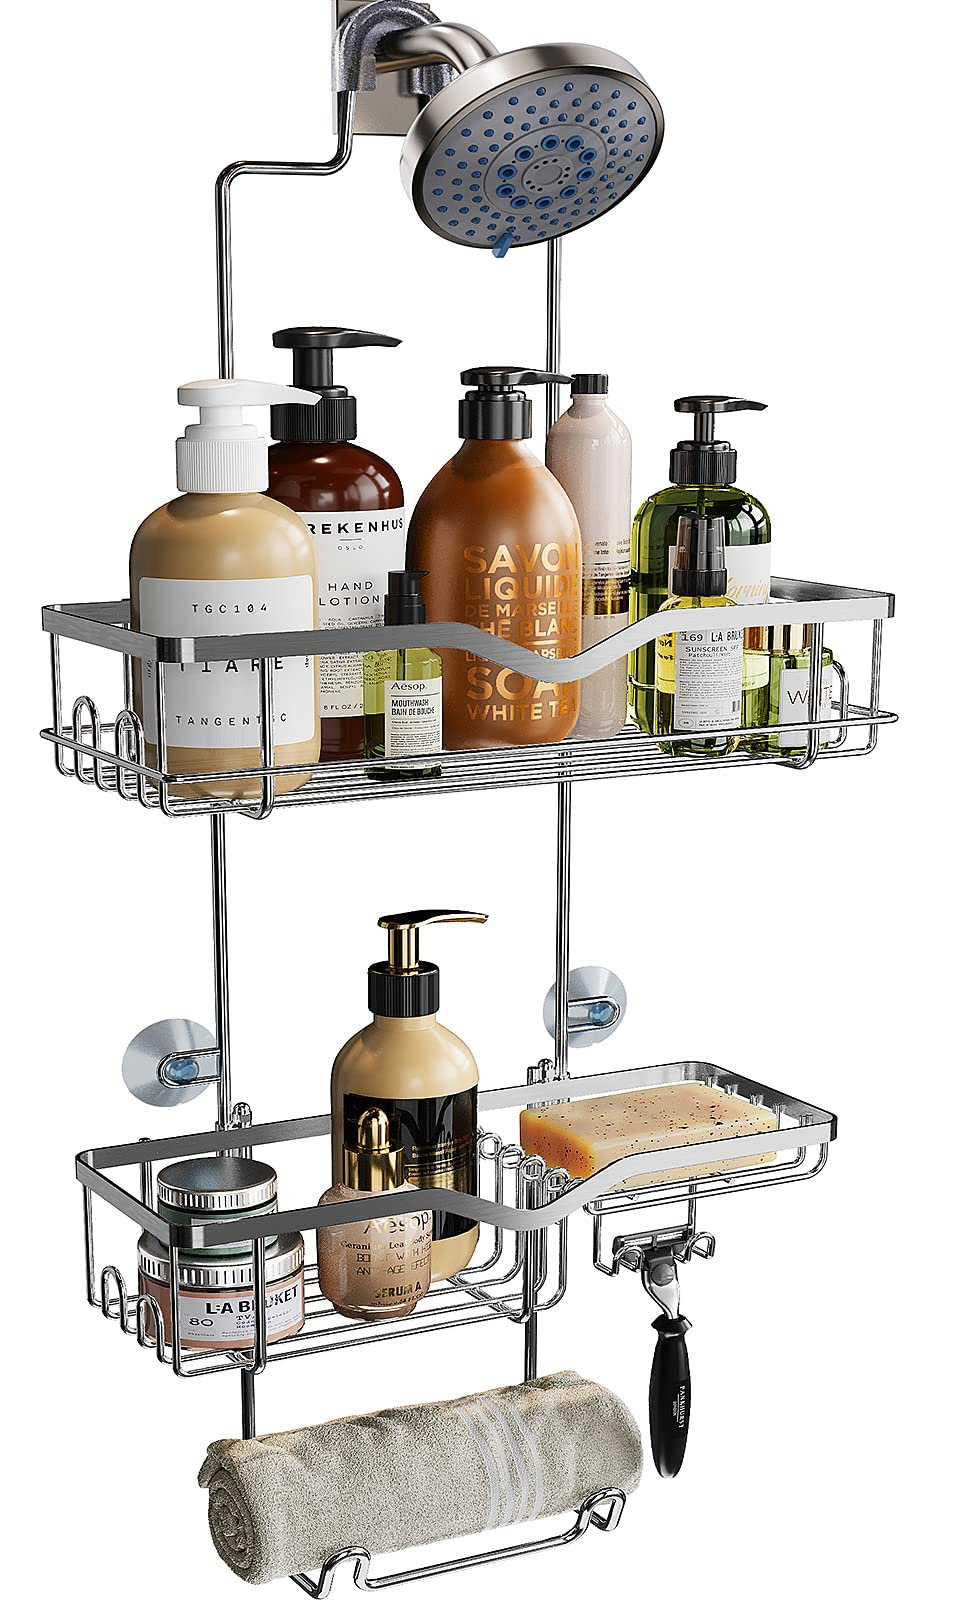 Lainhart Suction Stainless Steel Shower Caddy